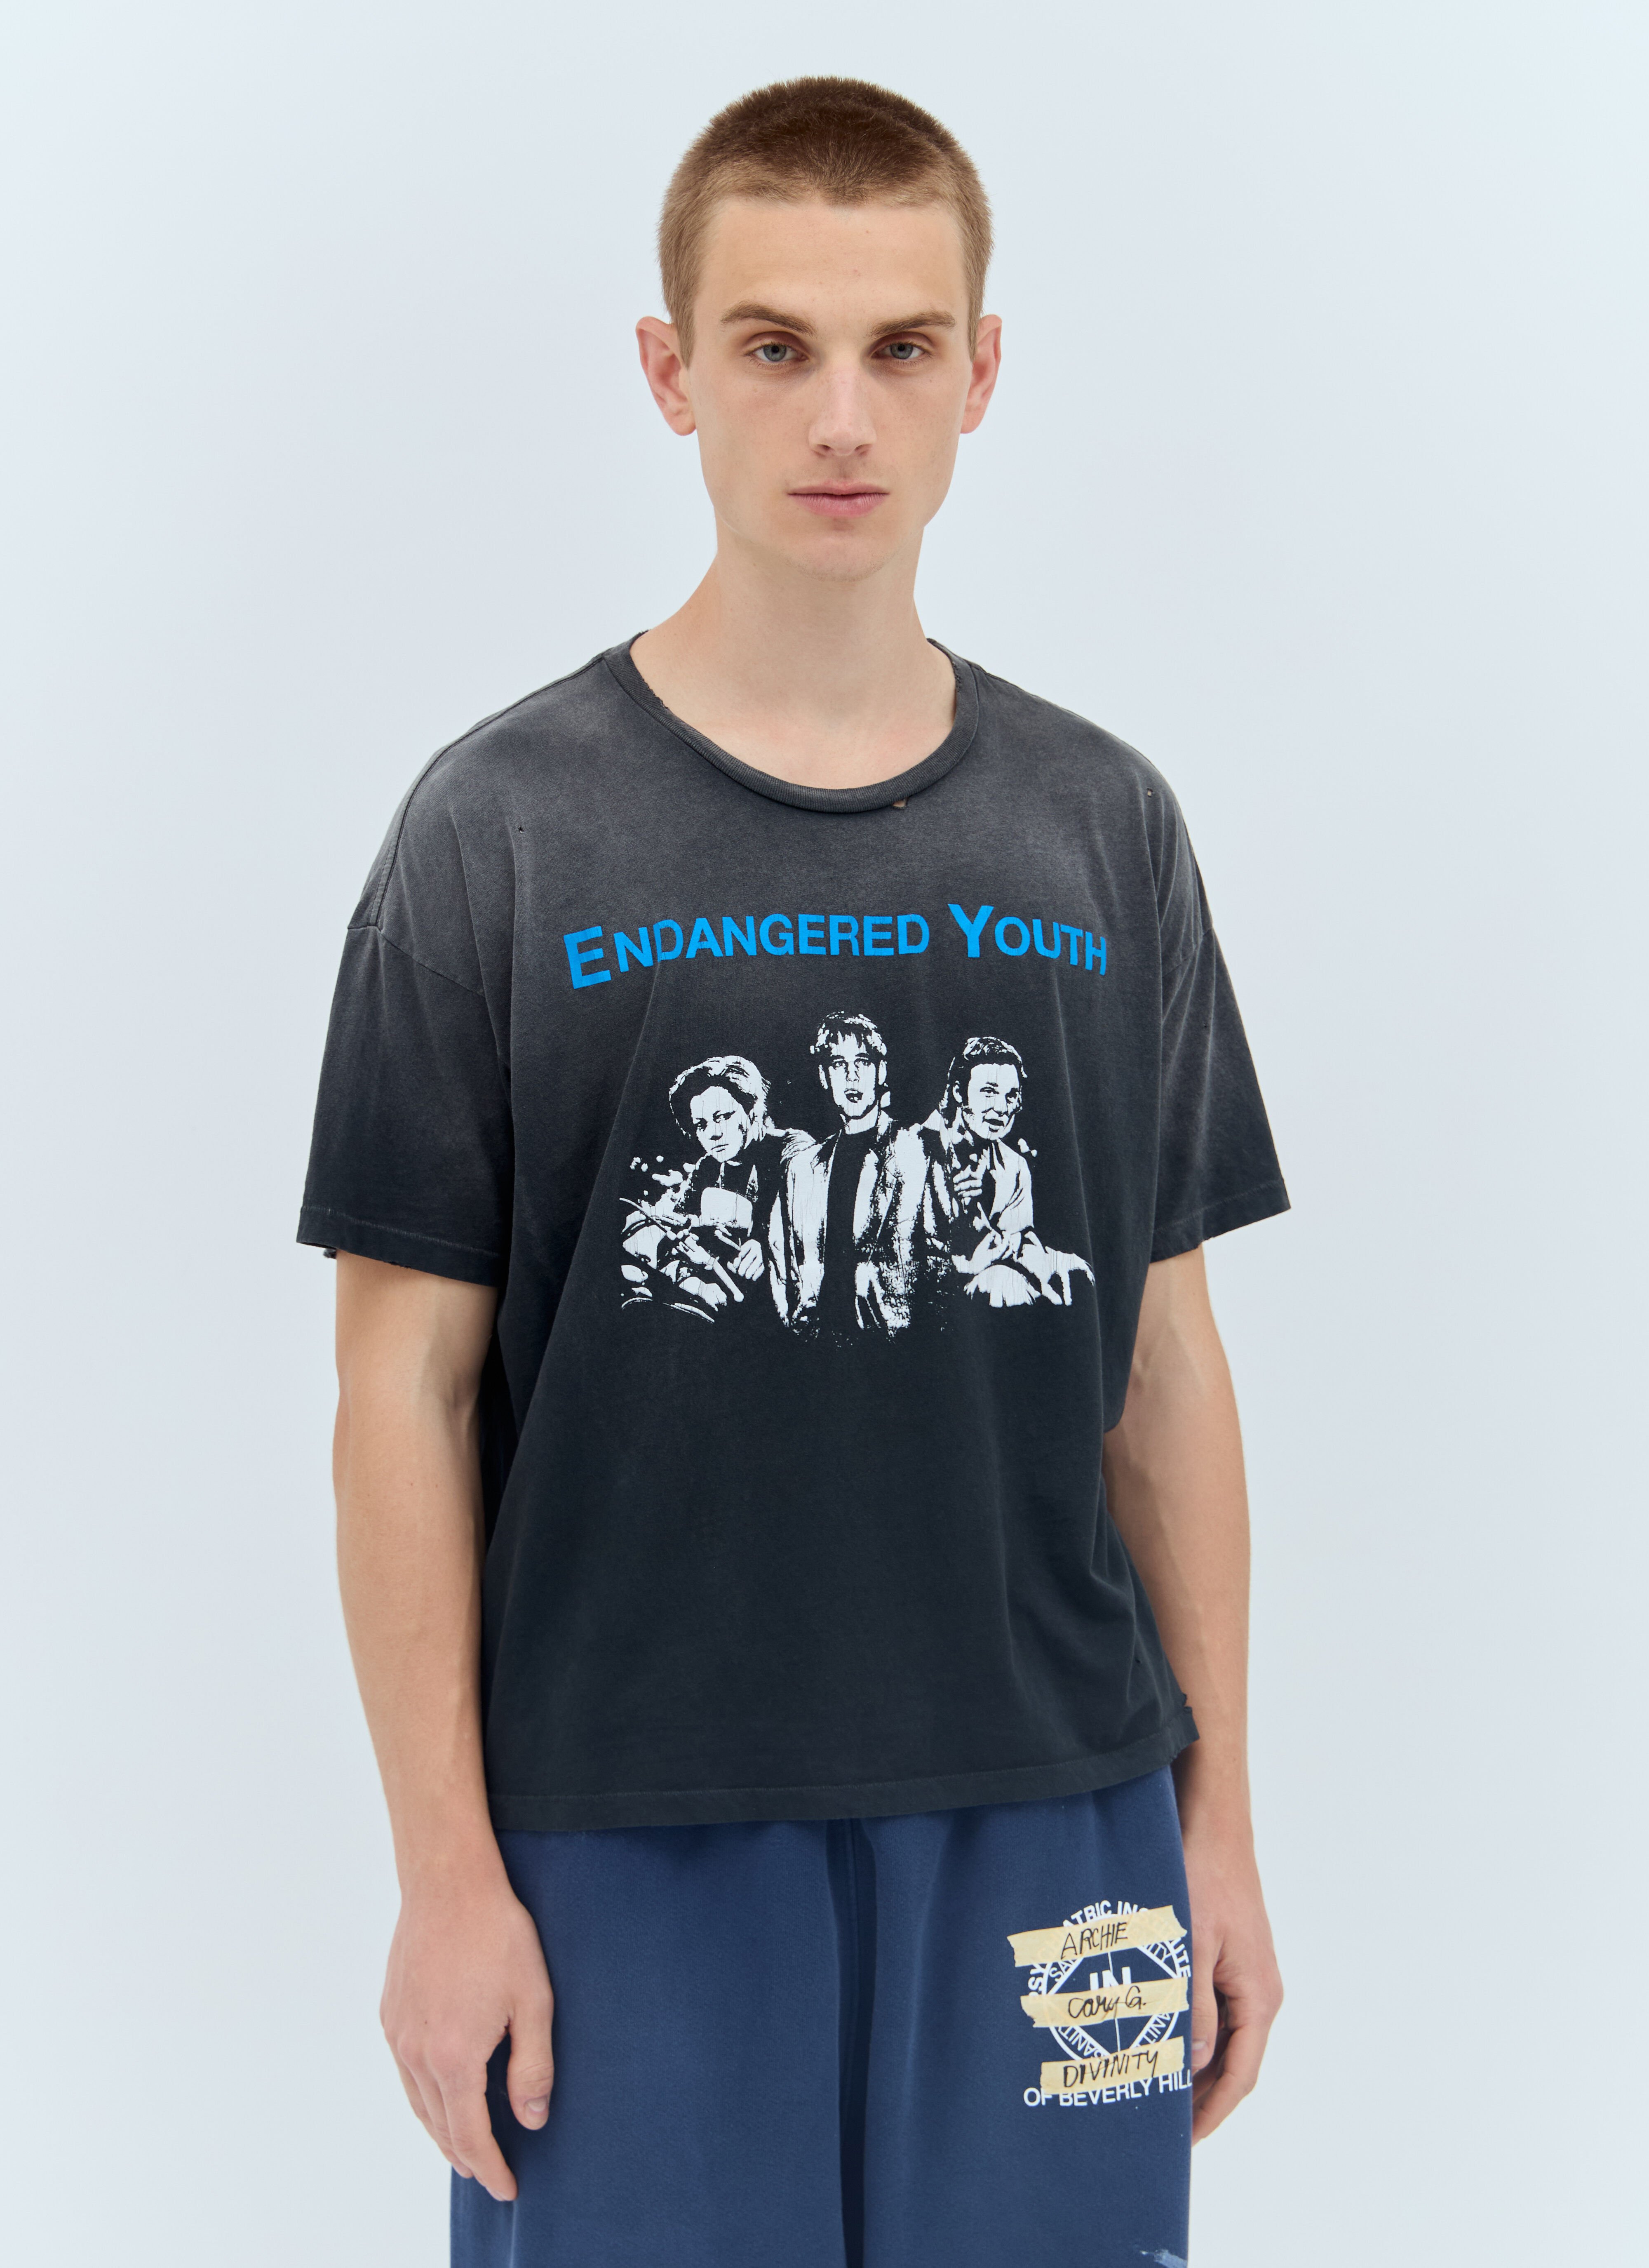 Acne Studios Endangered Youth T-Shirt 그레이 acn0155021